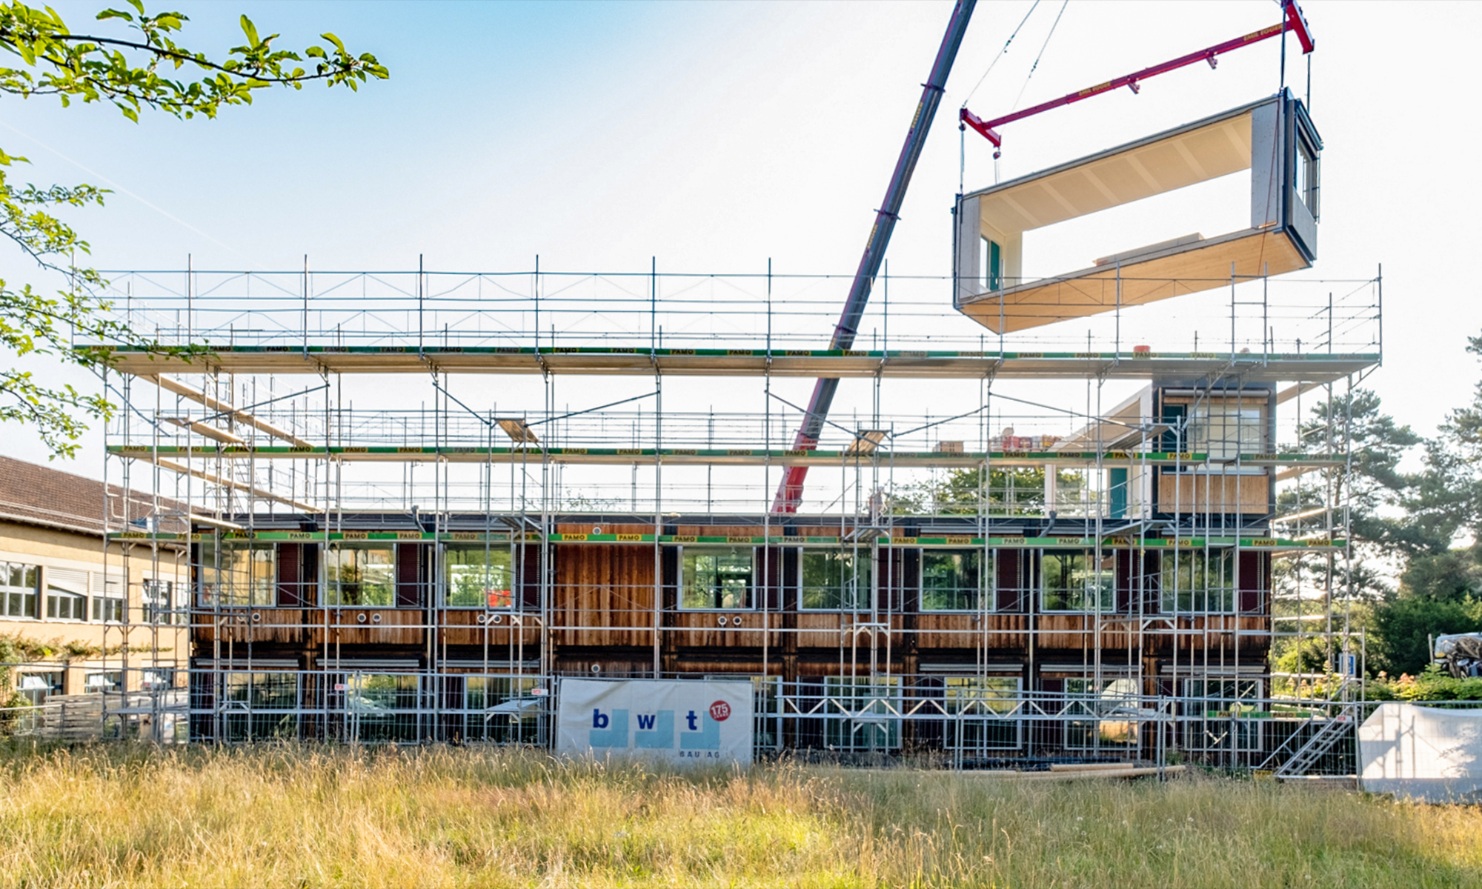 The existing ZM10 modular Friesenberg primary school is extended by adding another floor. A timber module is placed on the roof by crane. 